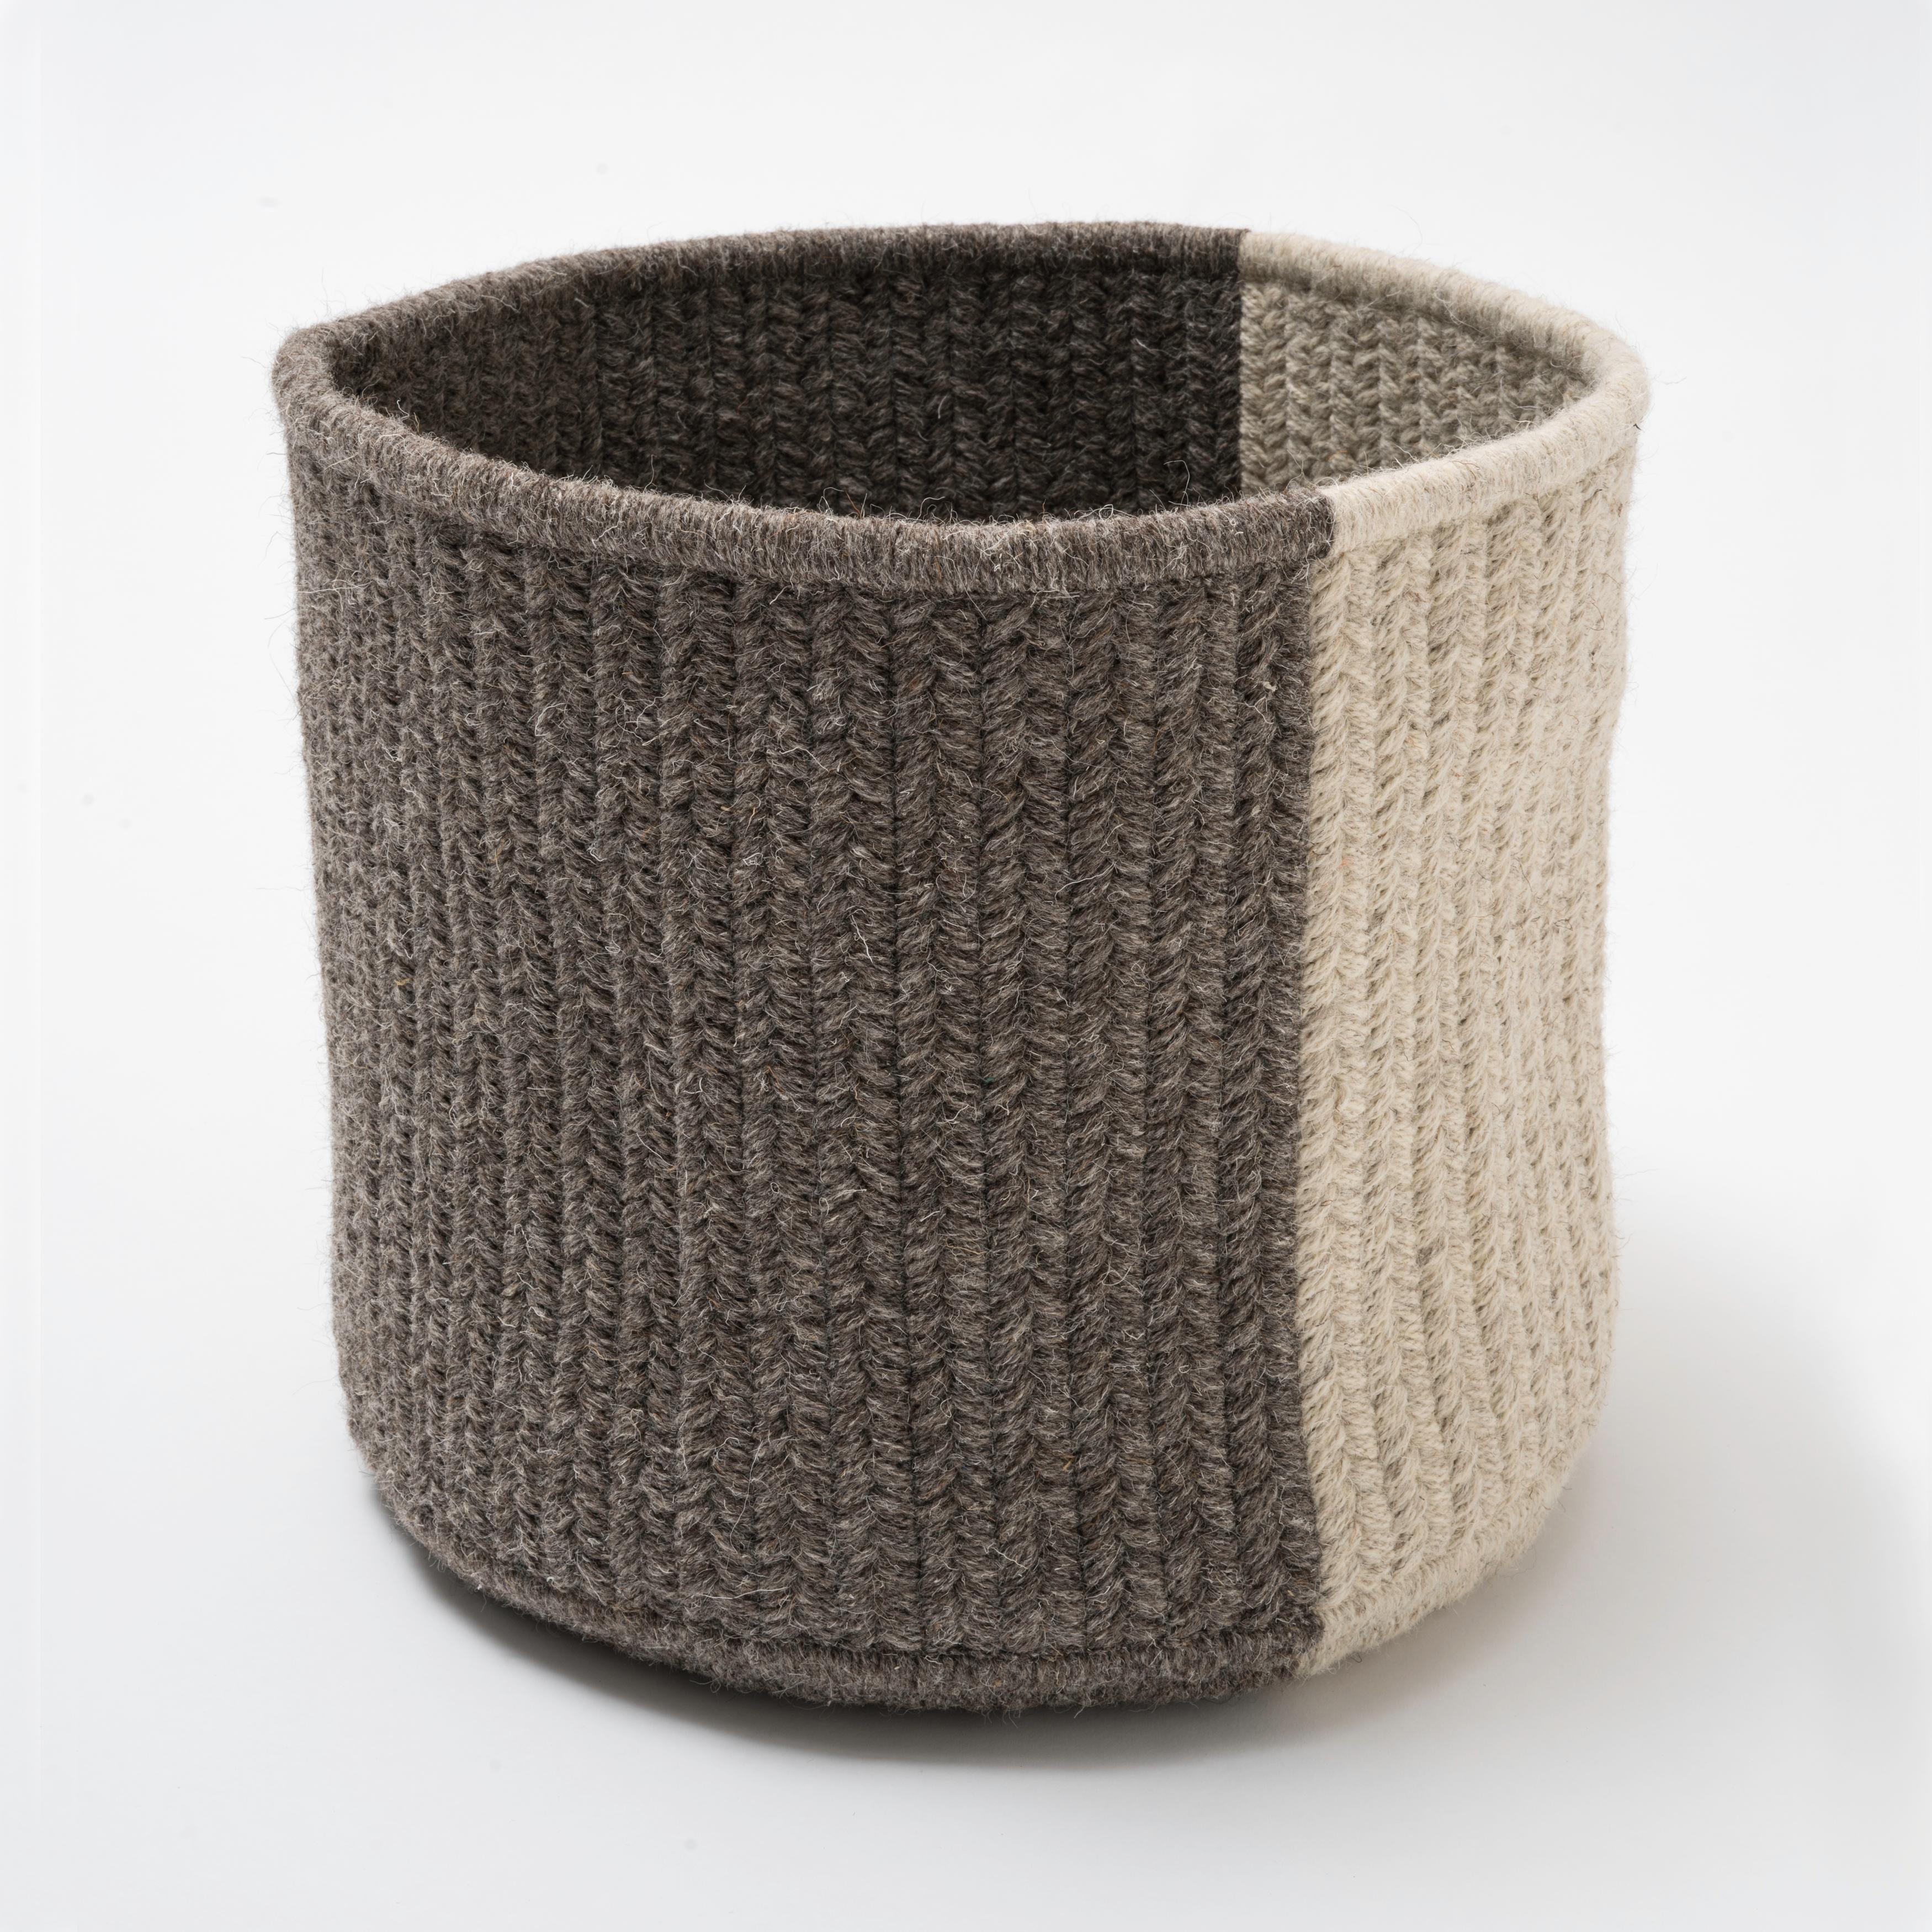 Balance Wool Basket in Light Grey and Cream Custom Woven in the USA (Wolle) im Angebot